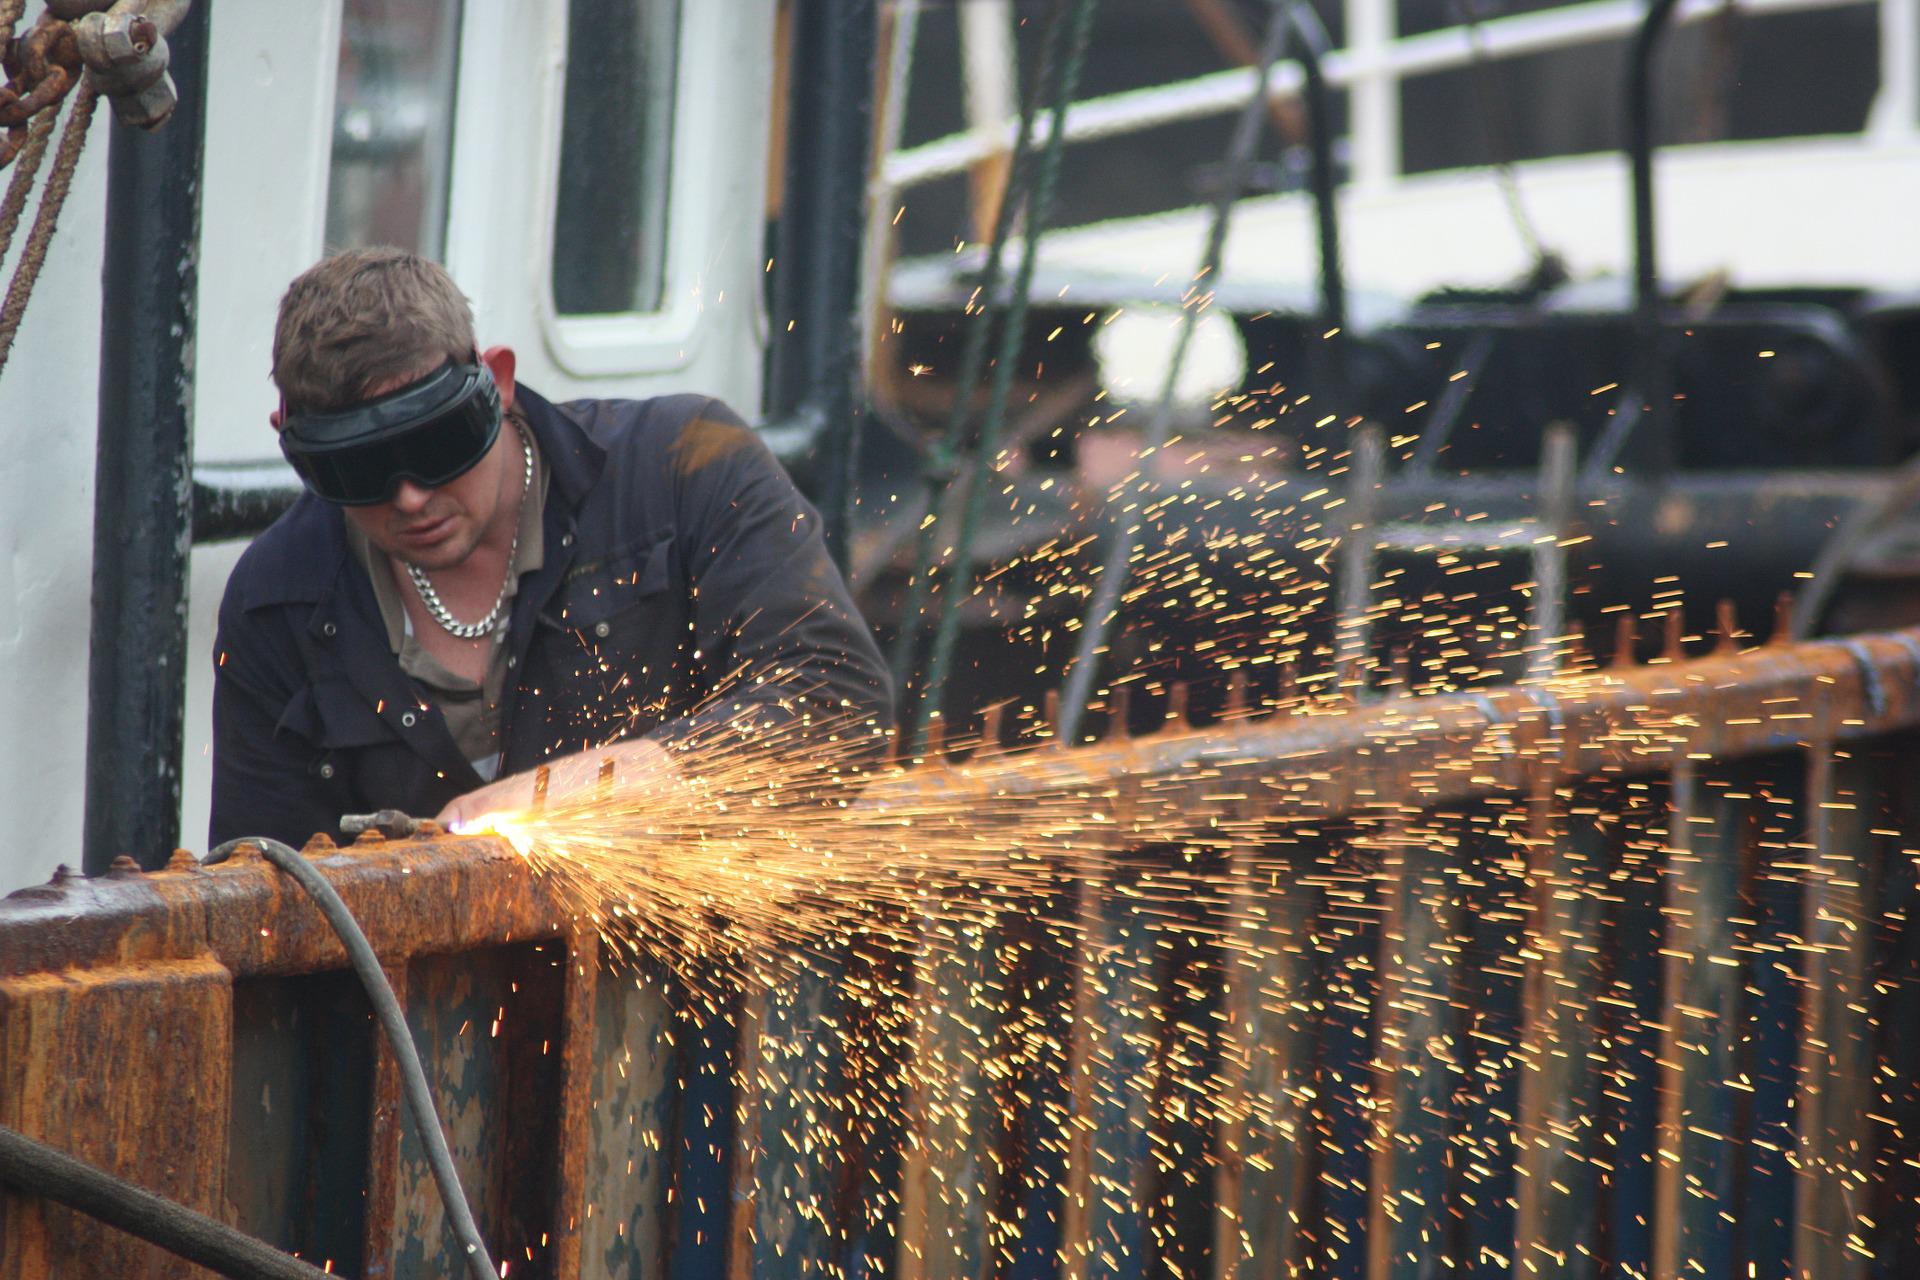 How Is Maritime Welding Different From Other Welding?